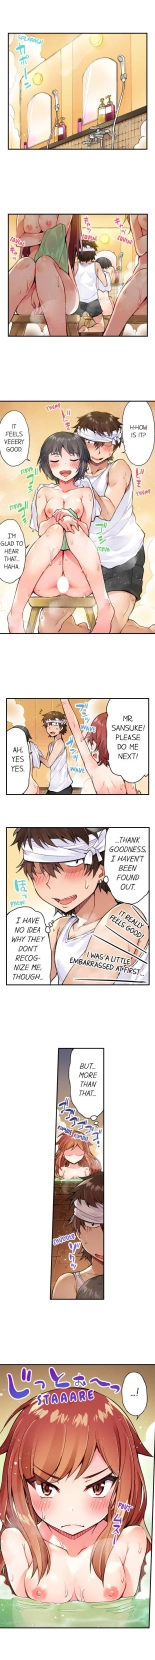 Traditional Job of Washing Girls' Body Ch. 1-189 : page 120